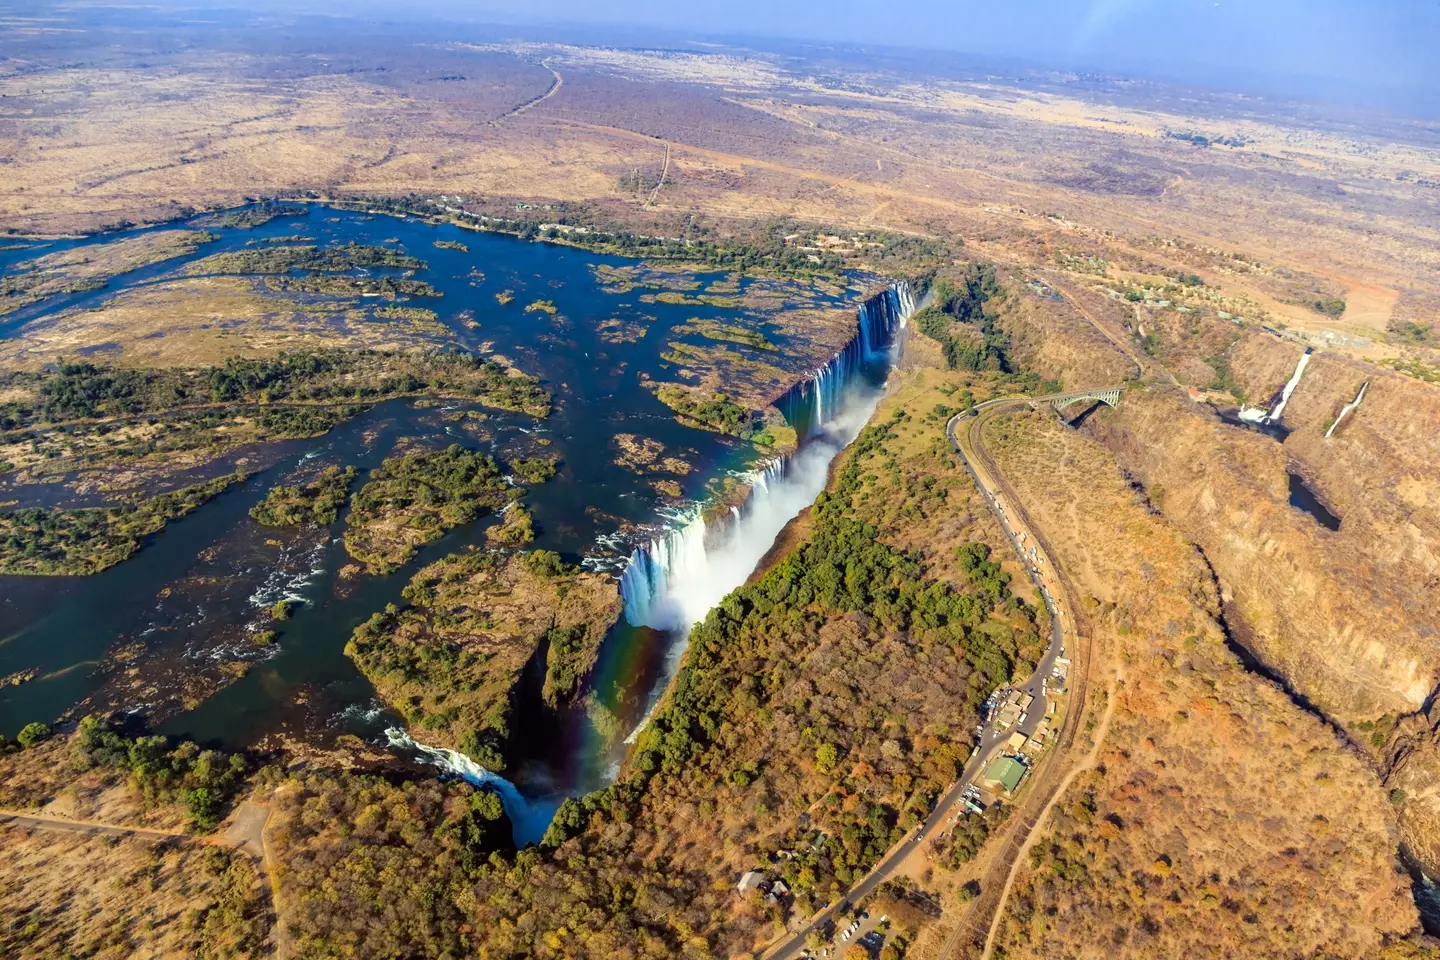 Landlocked Zambia could one day have its coastline due to the East African Rift.(Maria Swärd/Getty Images)